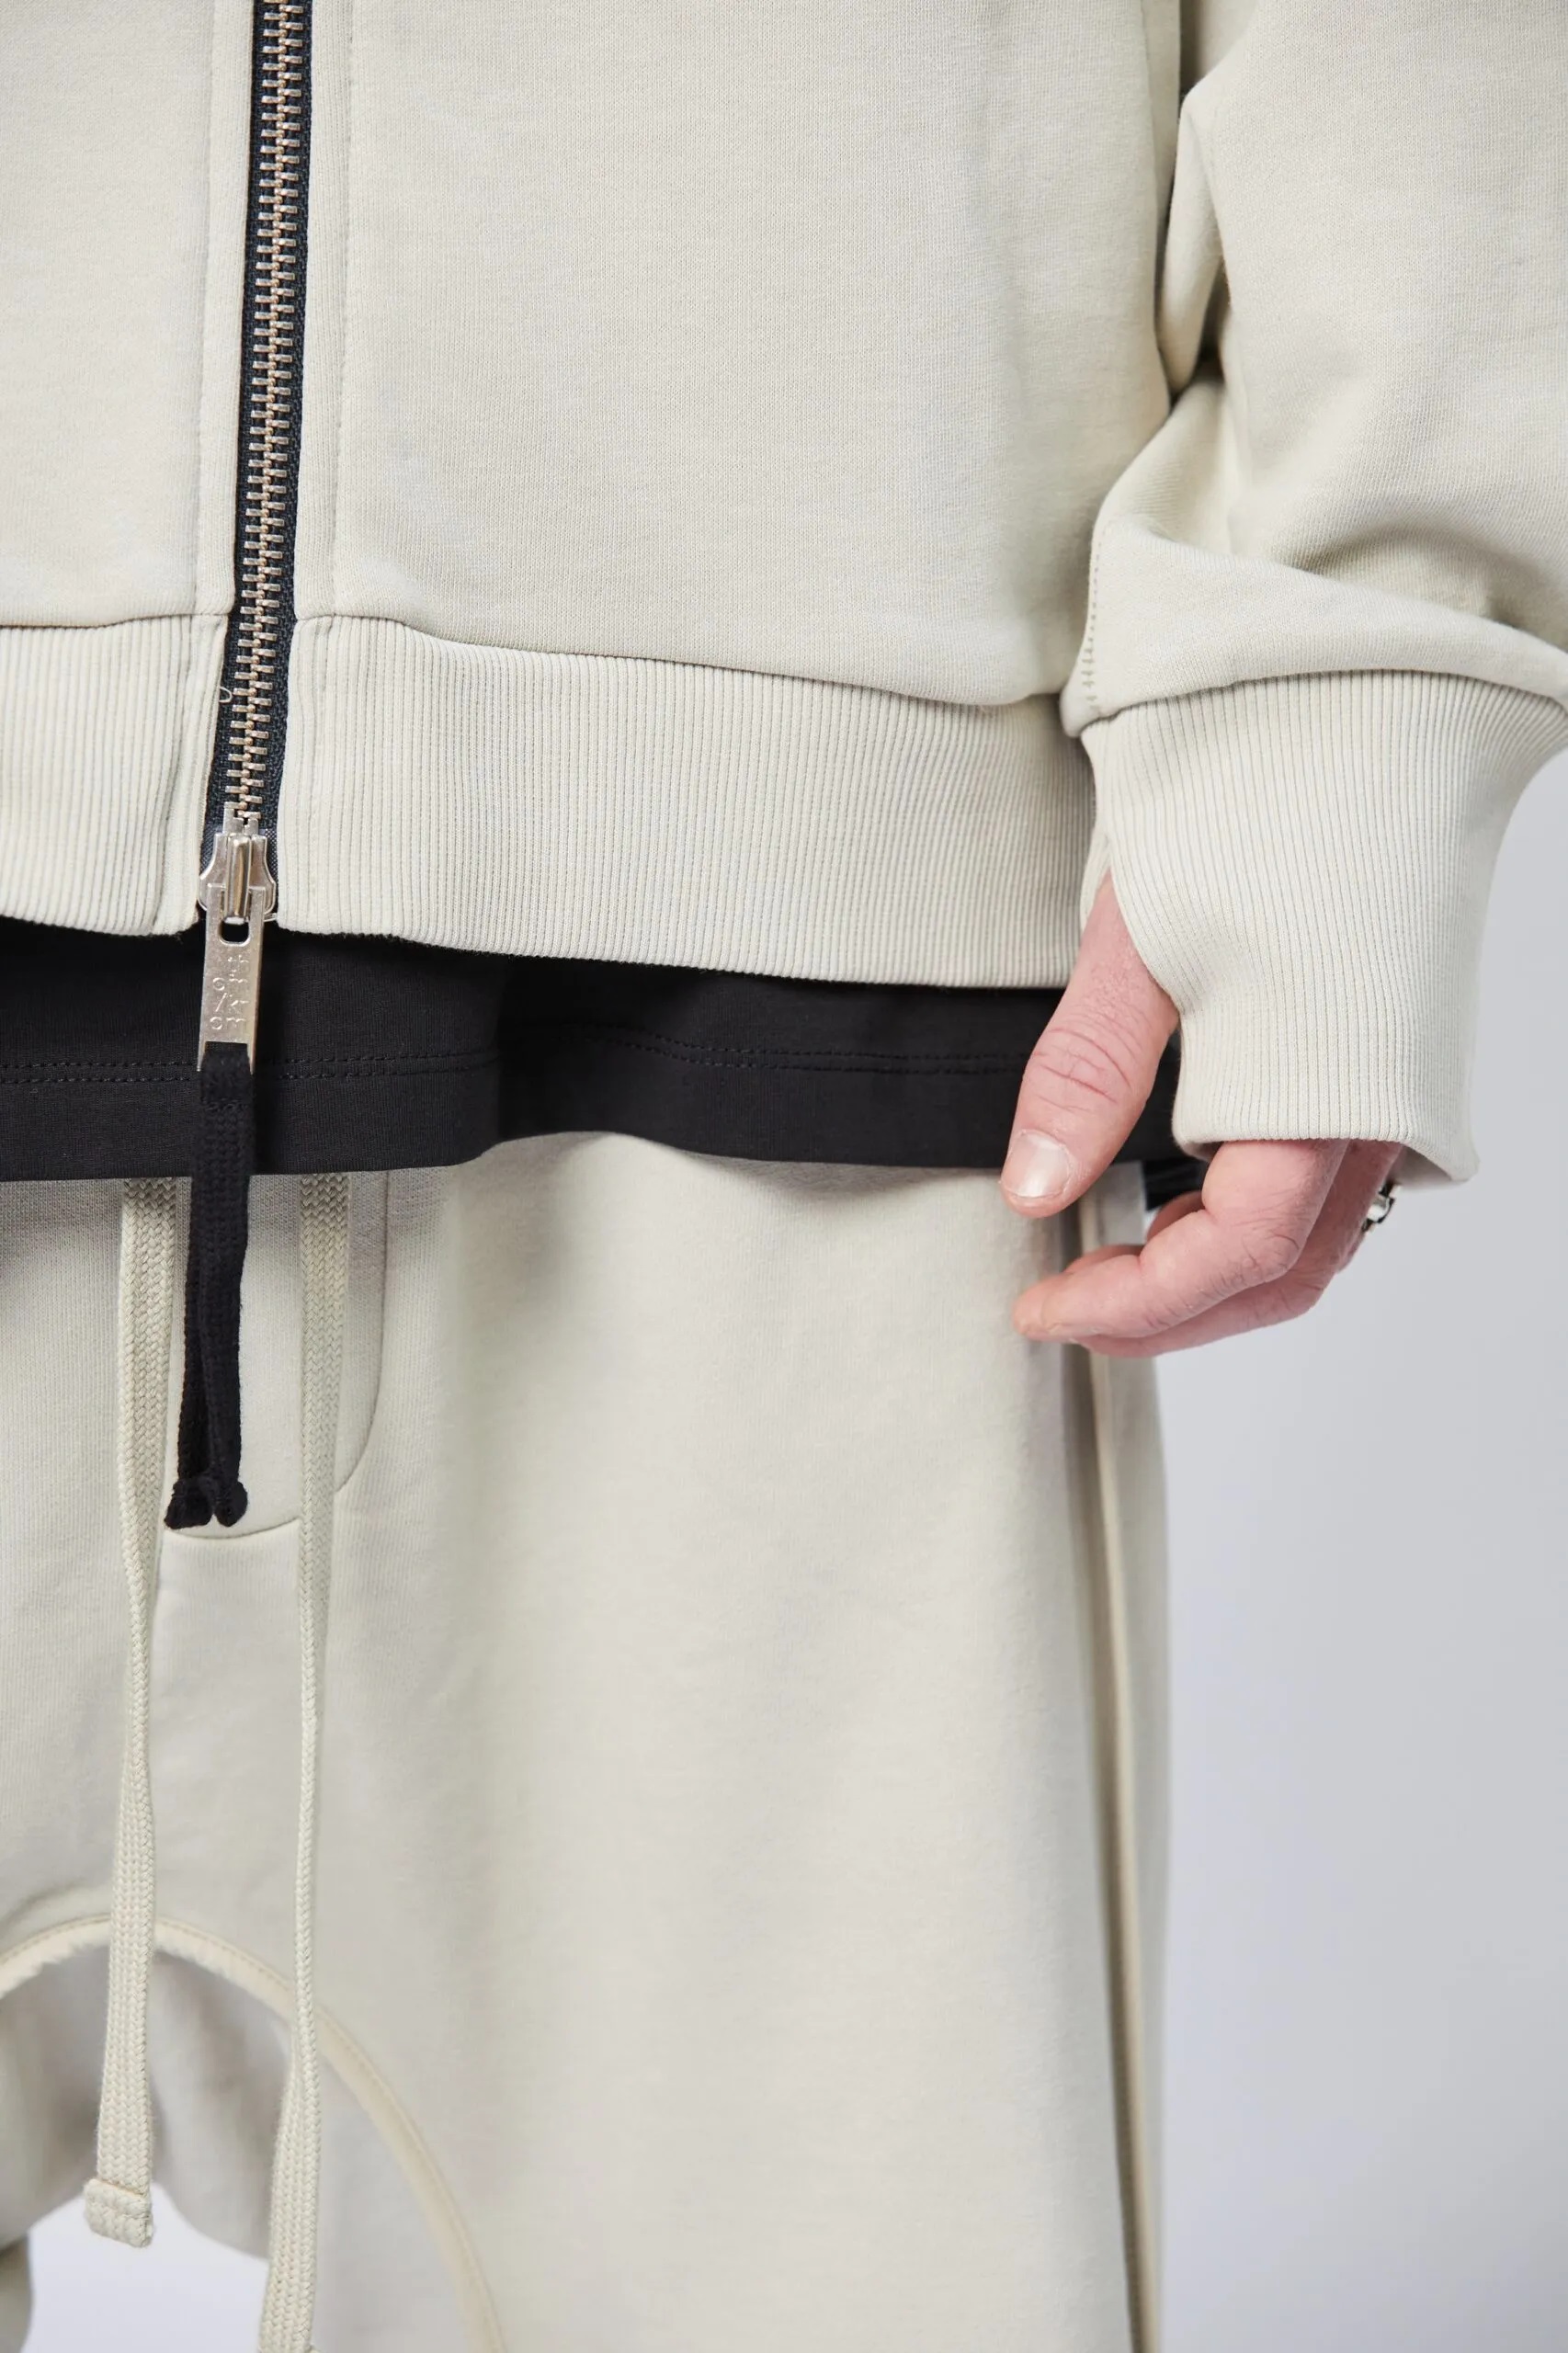 THOM KROM Oversize Zip Hoodie in Sand Shell L